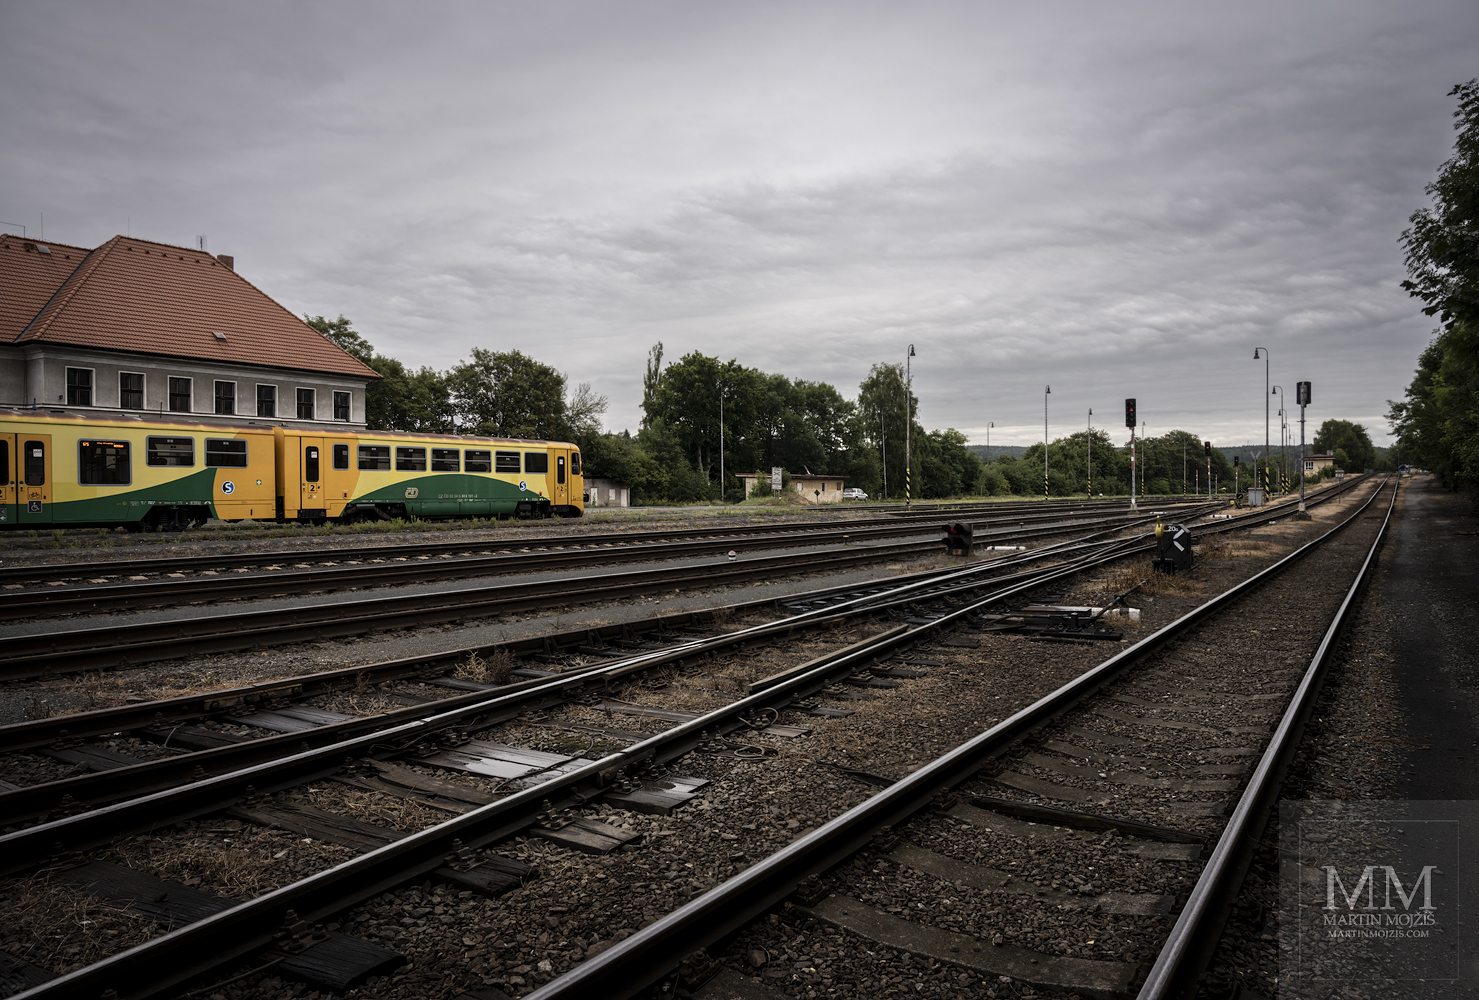 On the left is the post office building, on the right the tracks going up to the depot. Railway station Rakovnik.